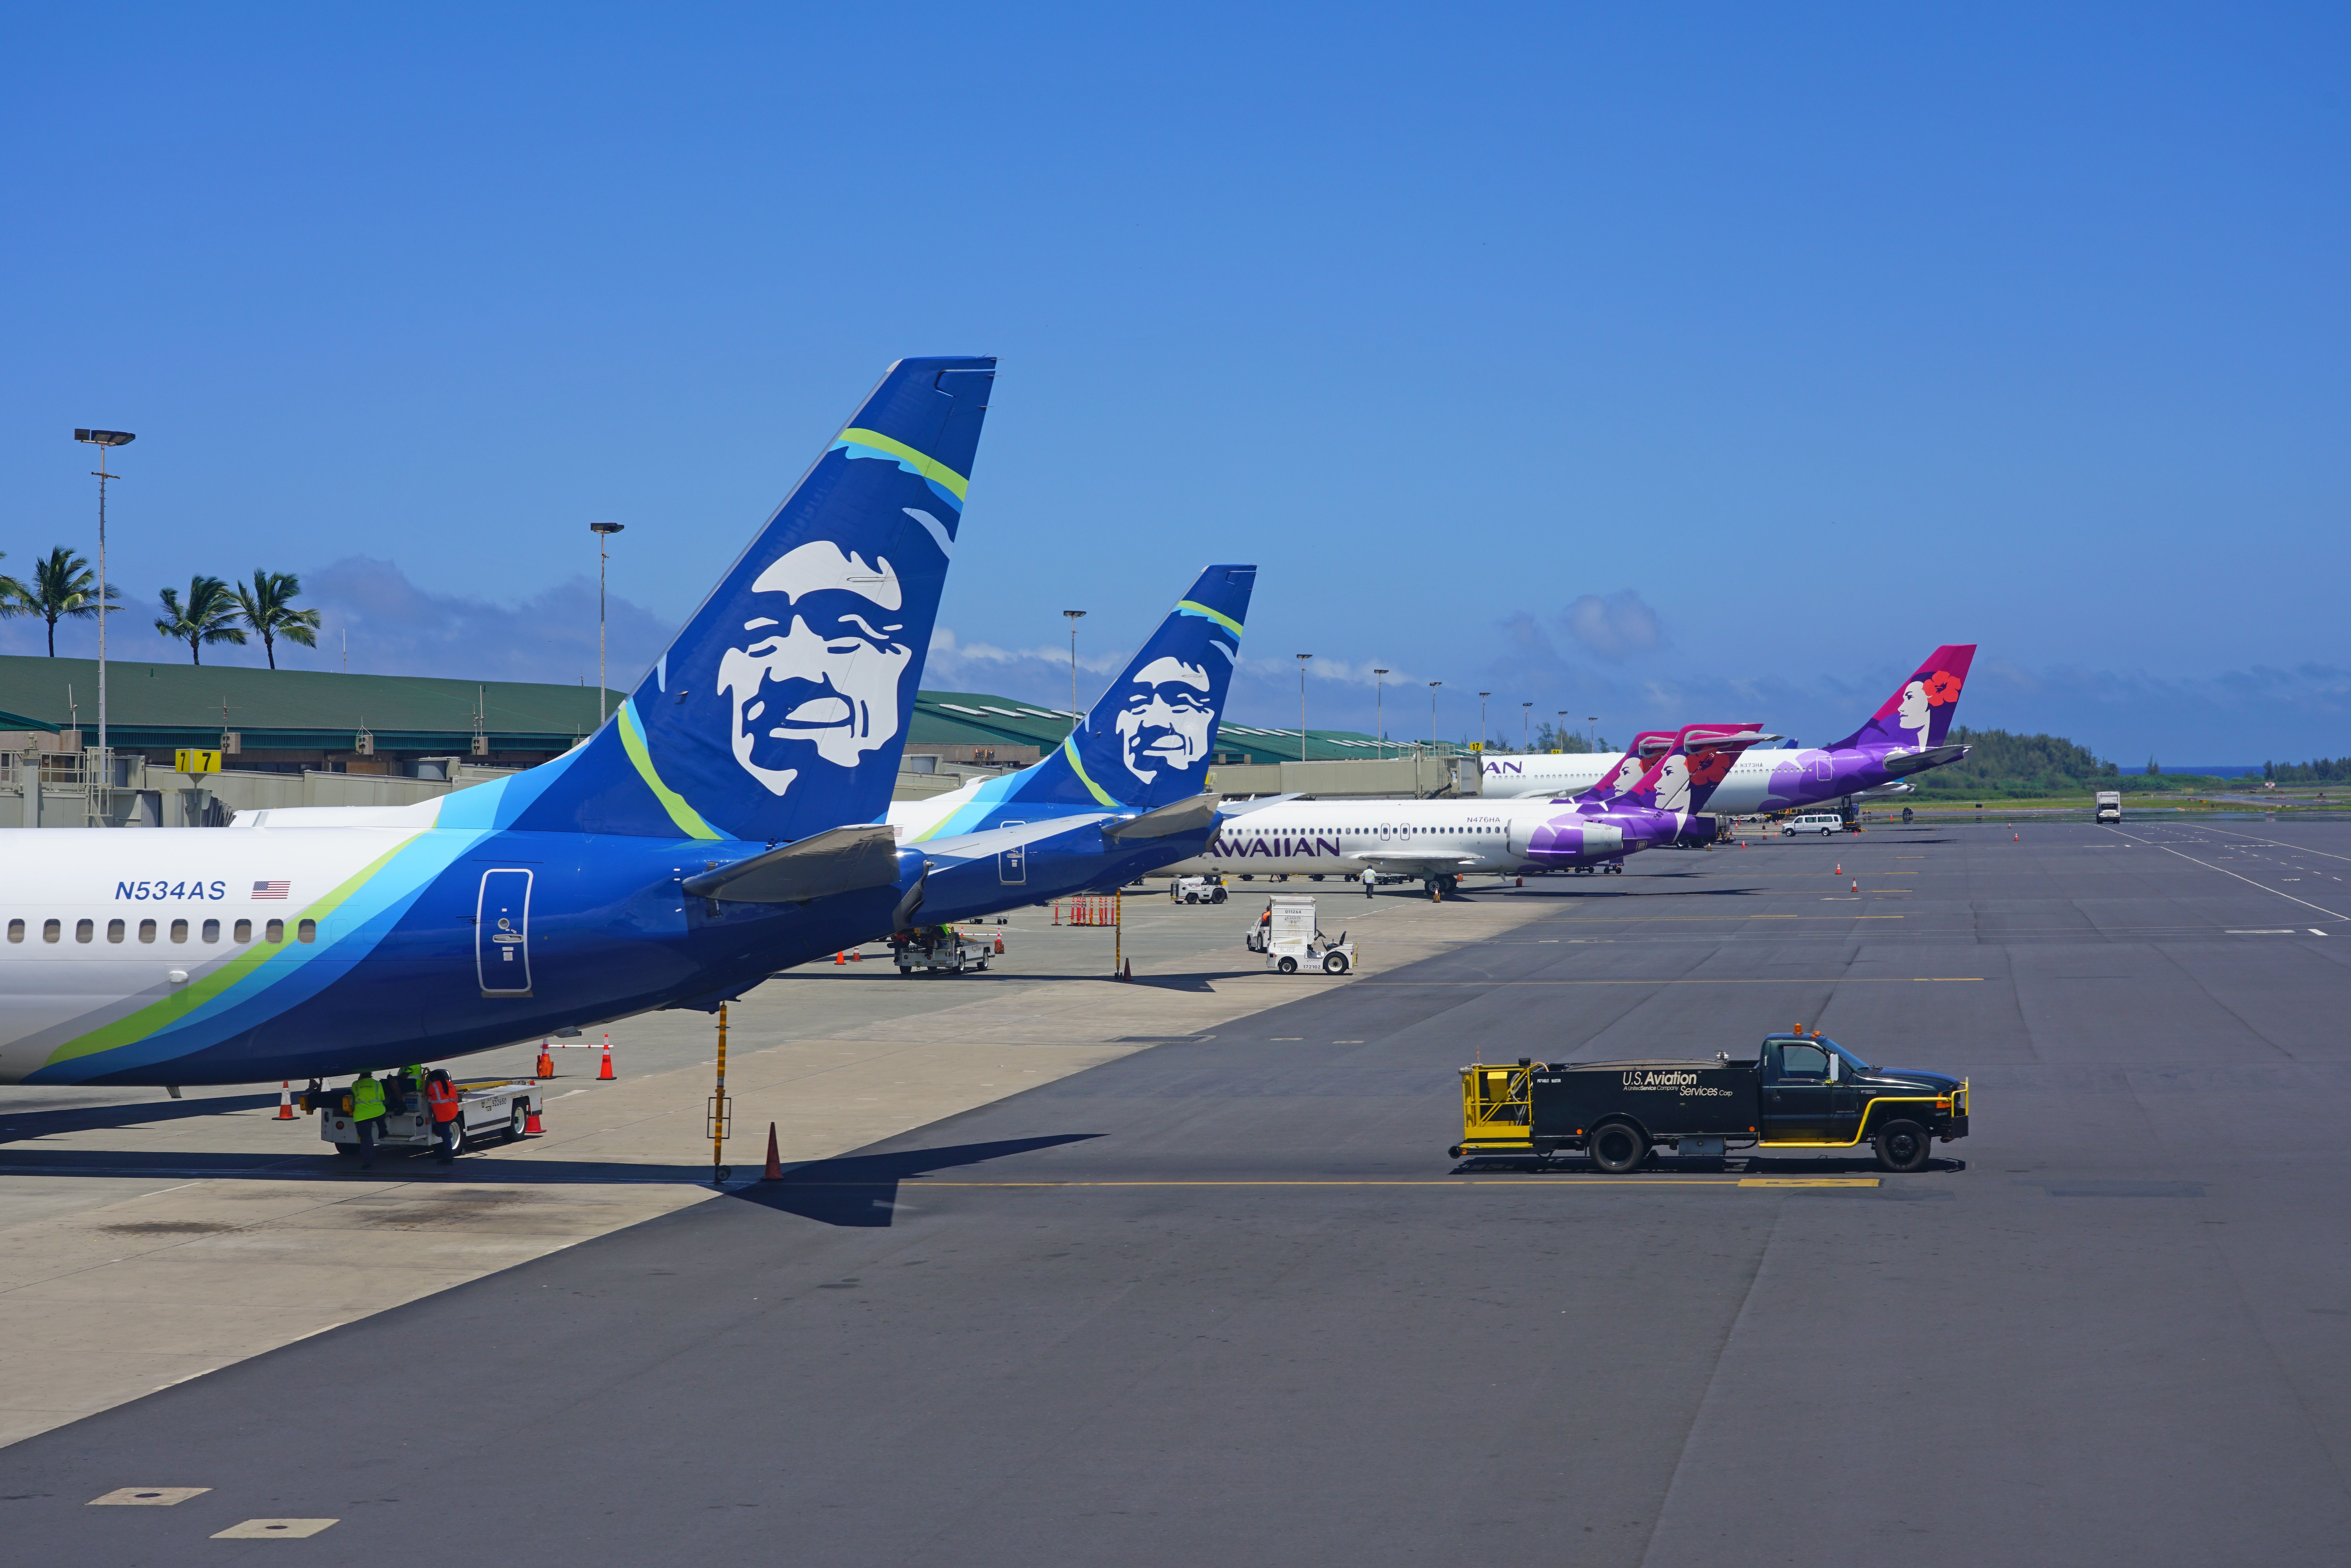 Two Alaska Airlines and two Hawaiian Airlines aircraft parked on an airport apron.